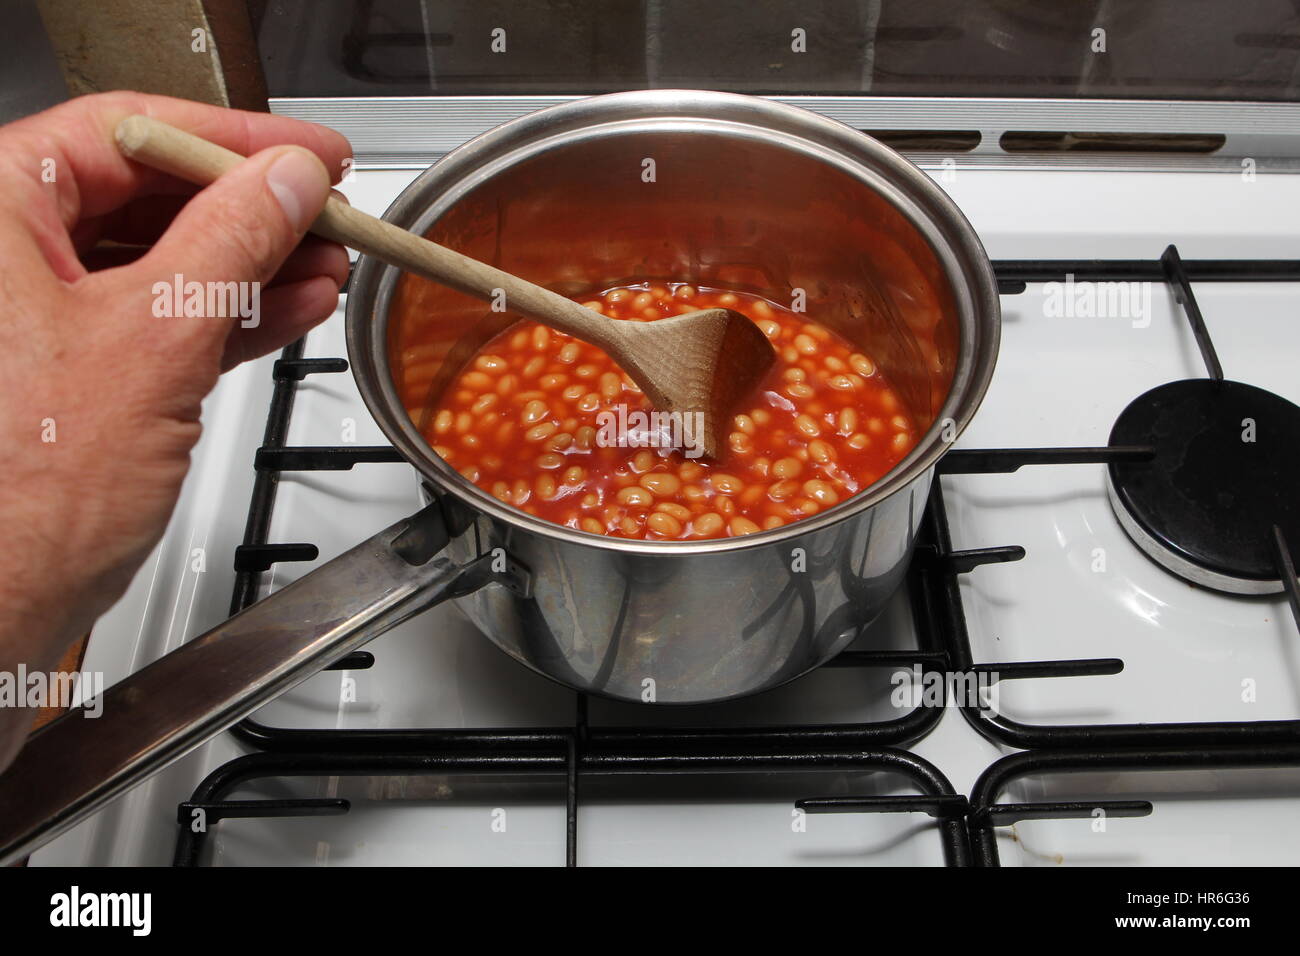 Man's hand stirring a pan of baked beans on a gas hob Stock Photo - Alamy